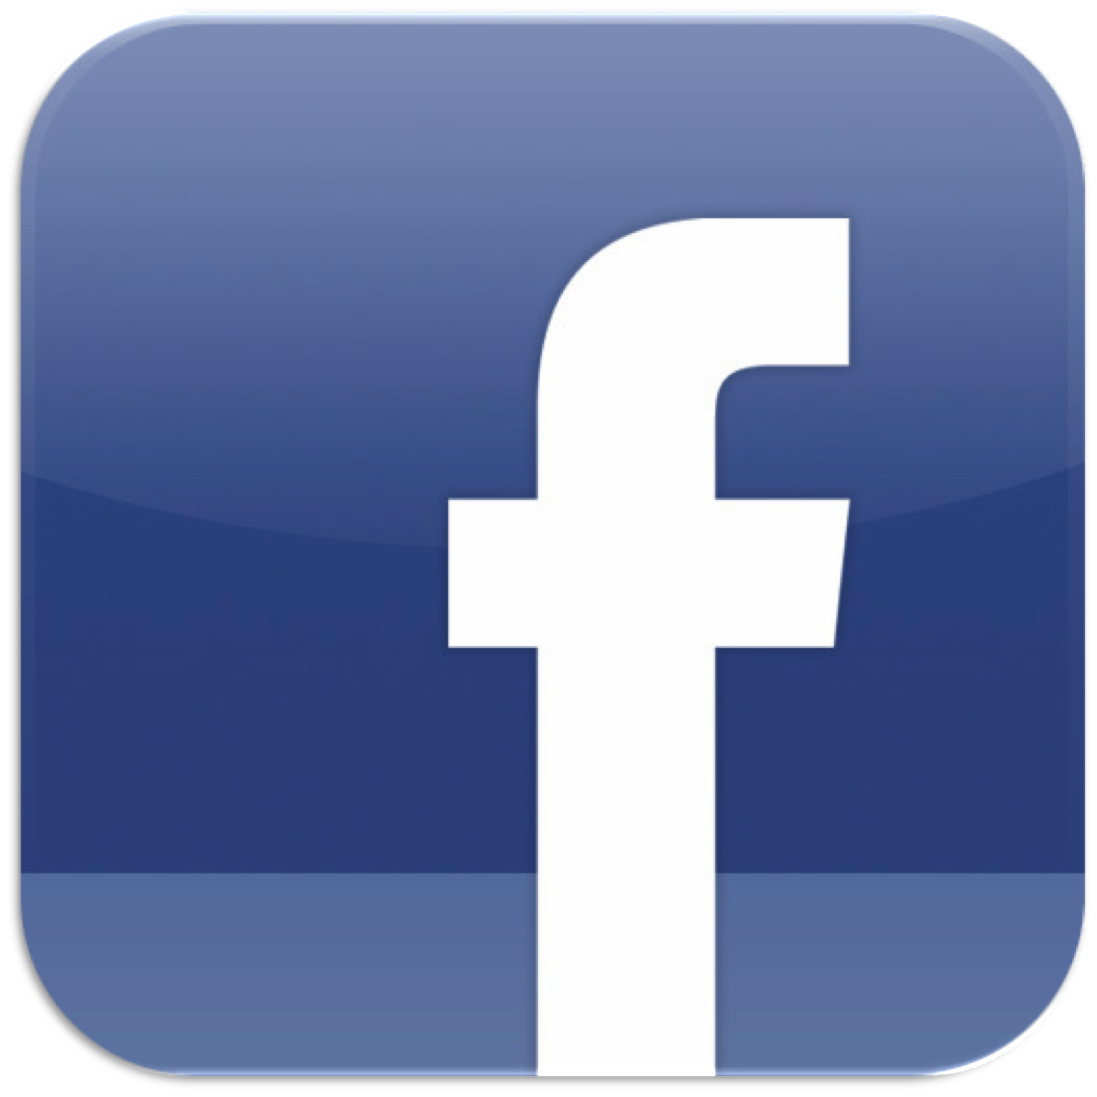 Facebook Icon Png 2.png. HD Wallpaper, HD Image, HD Picture